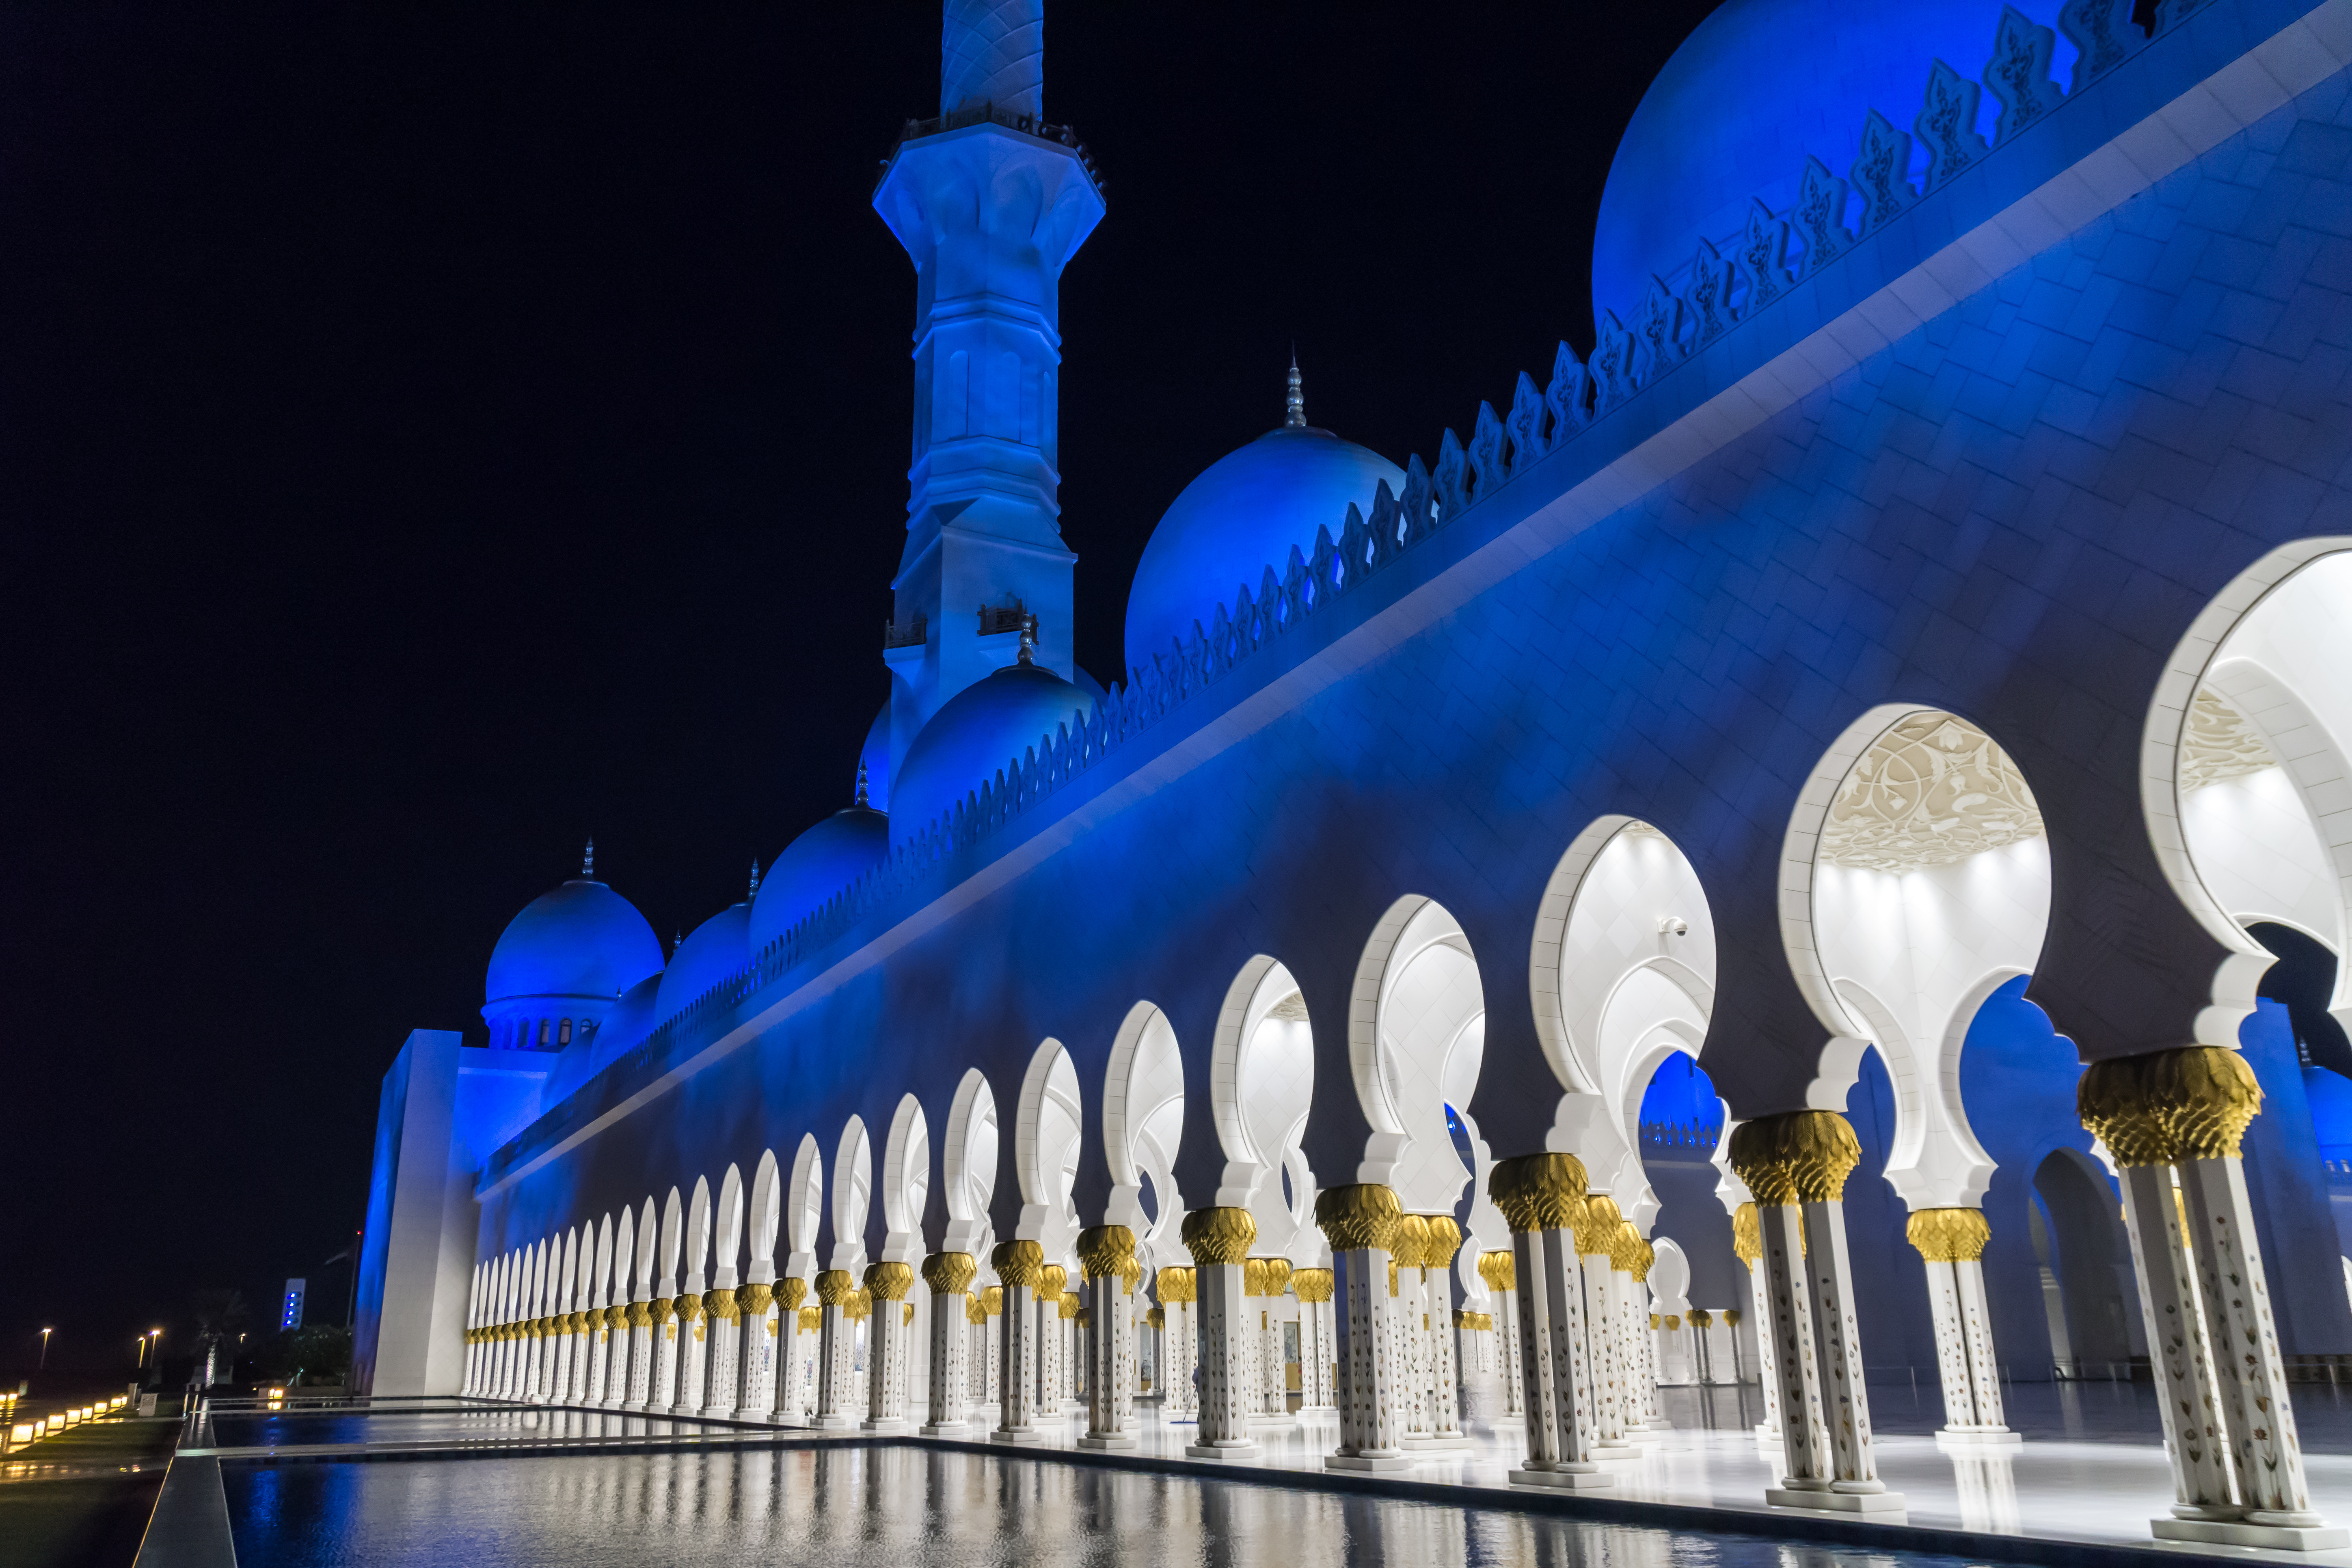 Download PC Wallpaper religious, sheikh zayed grand mosque, abu dhabi, mosque, united arab emirates, mosques